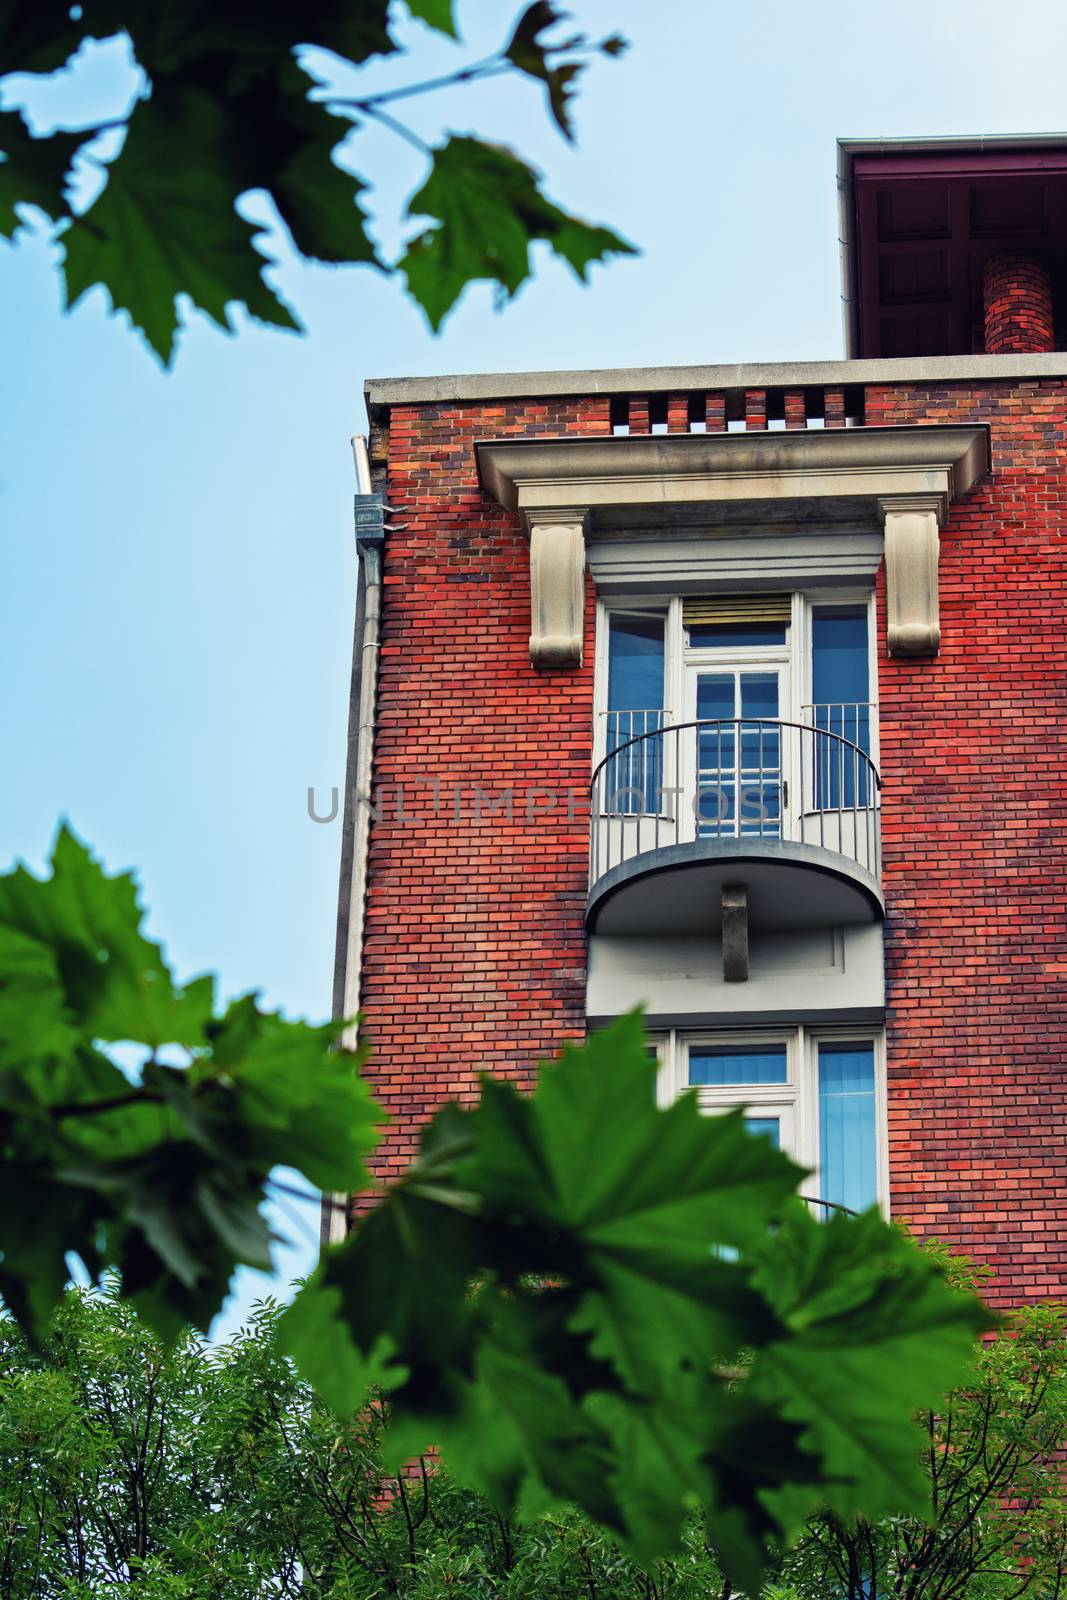 Low angle view of a balcony on a beautiful residential building with red brick framed by tree branches and green leaves.